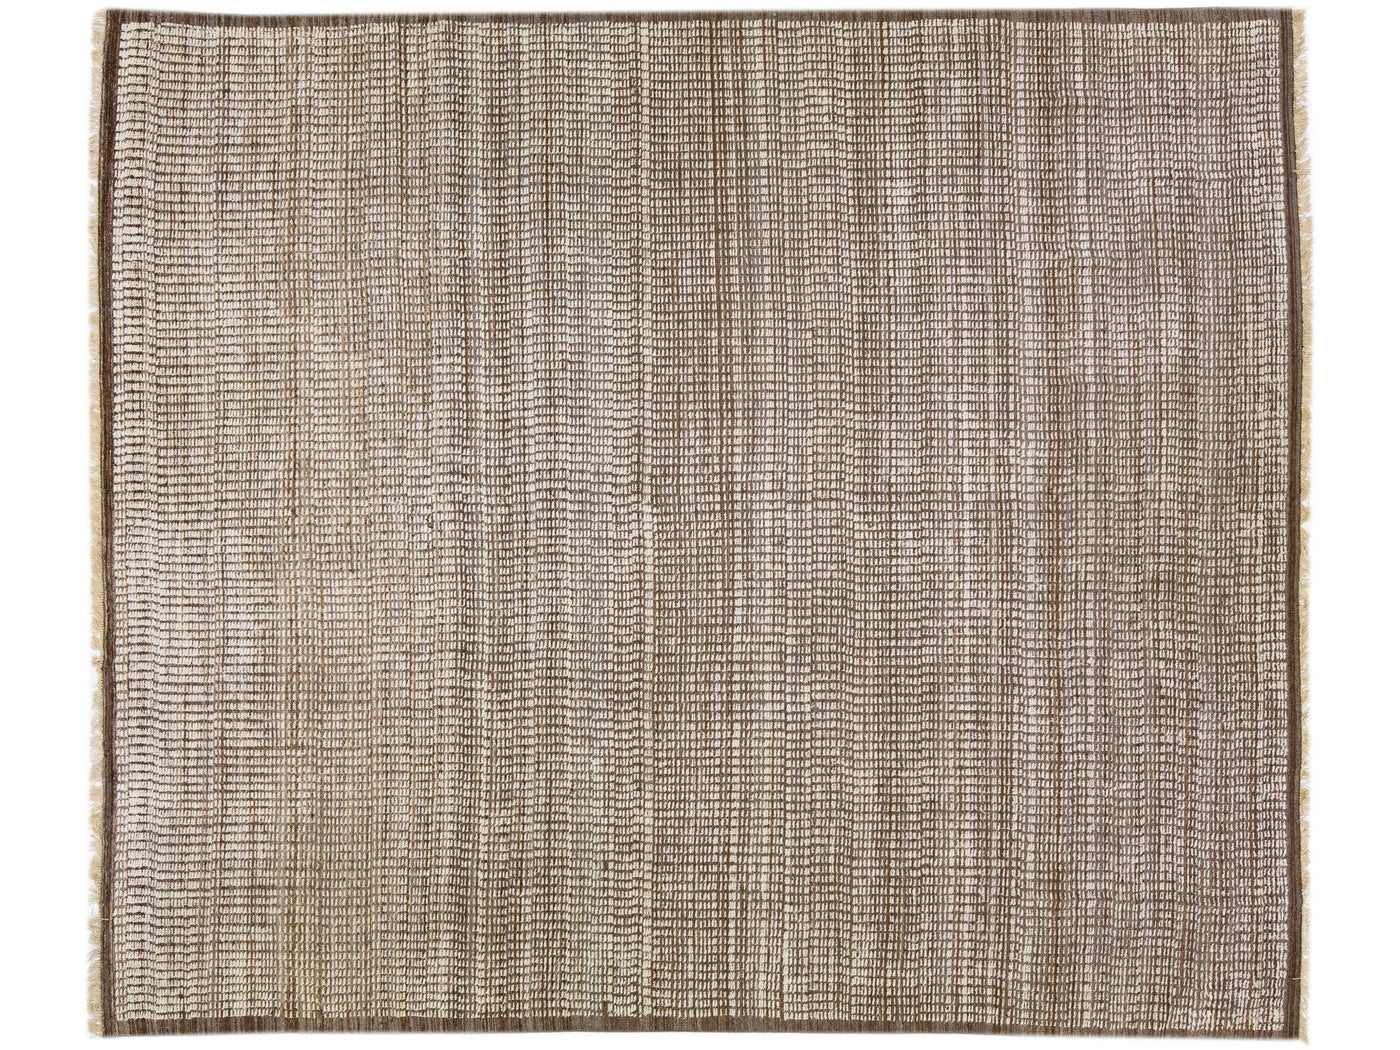 Brown Modern Moroccan Style Handmade Wool Rug with Subtle Pattern